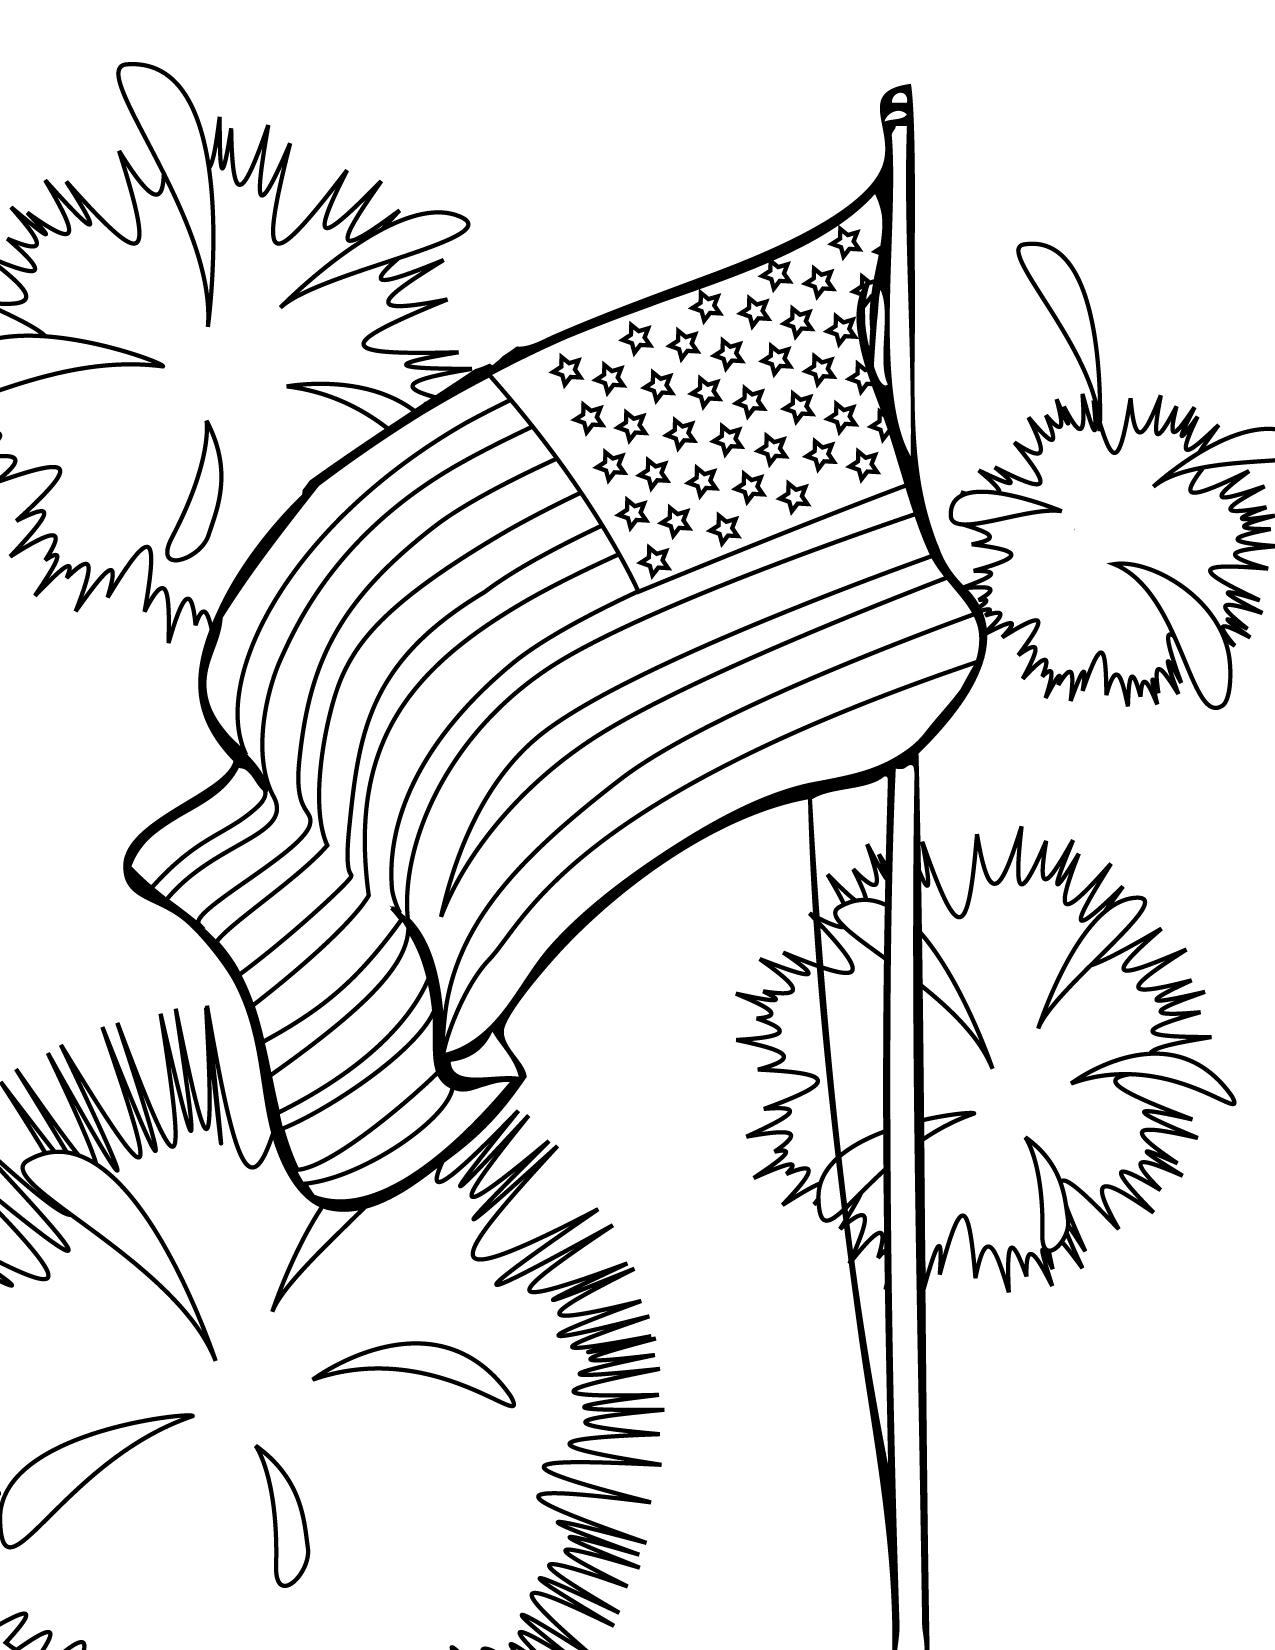 4th-of-july-coloring-pages | wallpapers55.com - Best Wallpapers 